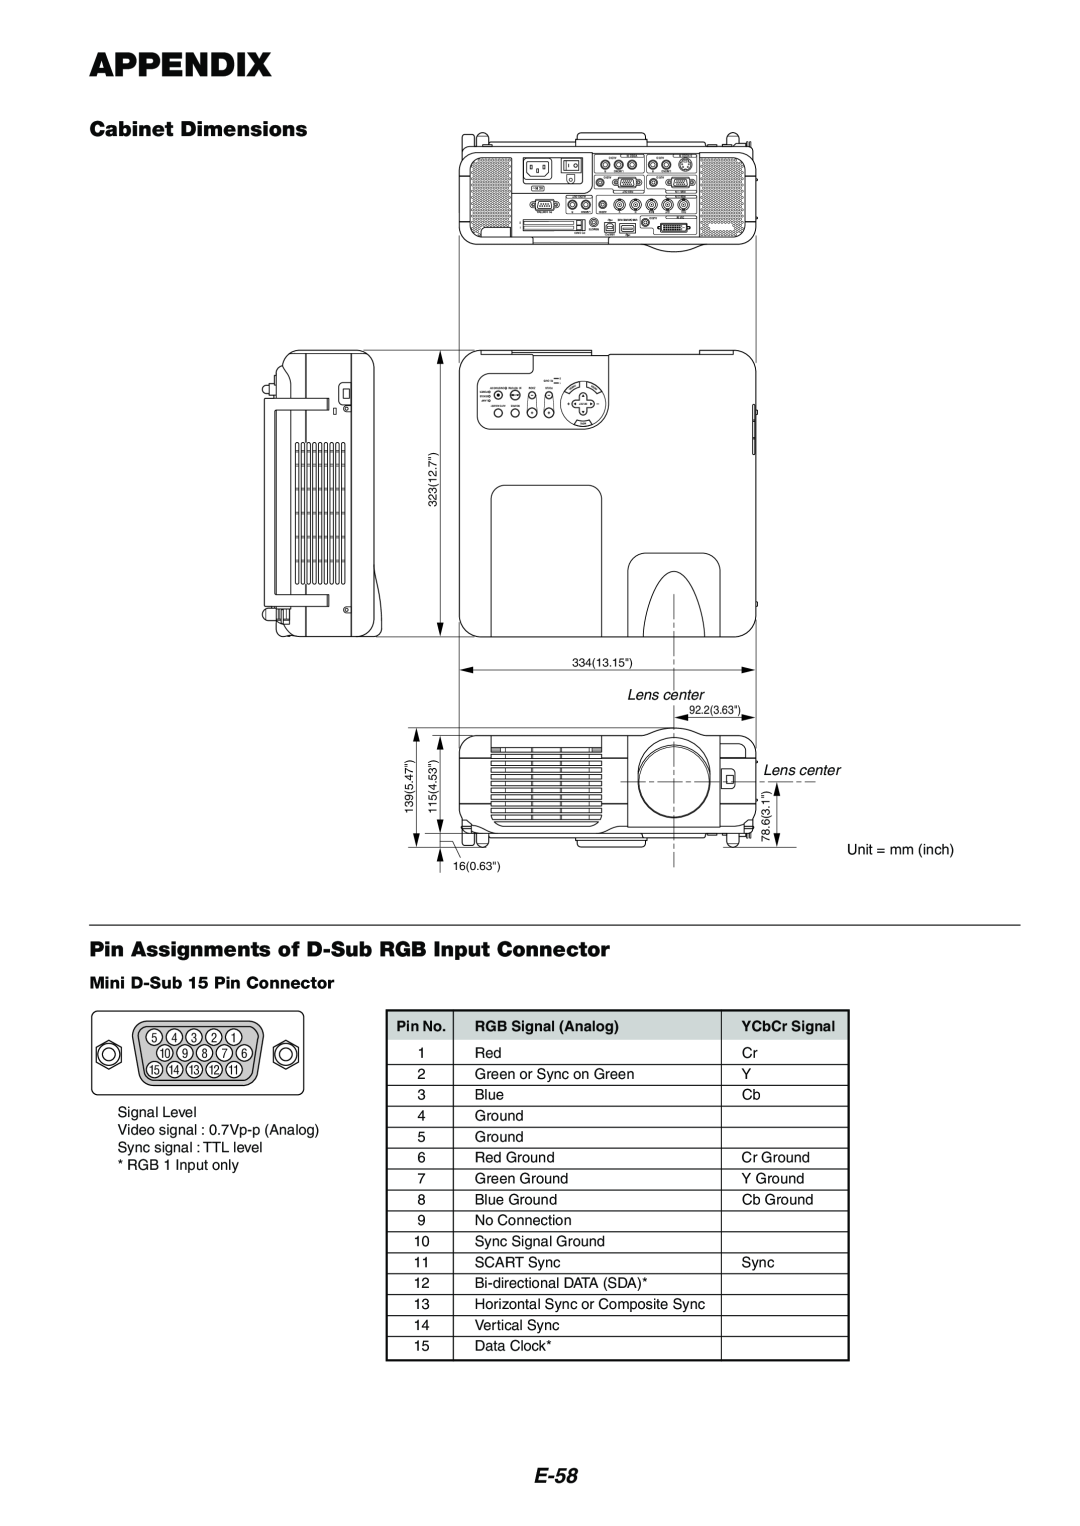 NEC MT1065/MT1060 Appendix, Cabinet Dimensions, Pin Assignments of D-Sub RGB Input Connector, E-58, Pin No, YCbCr Signal 